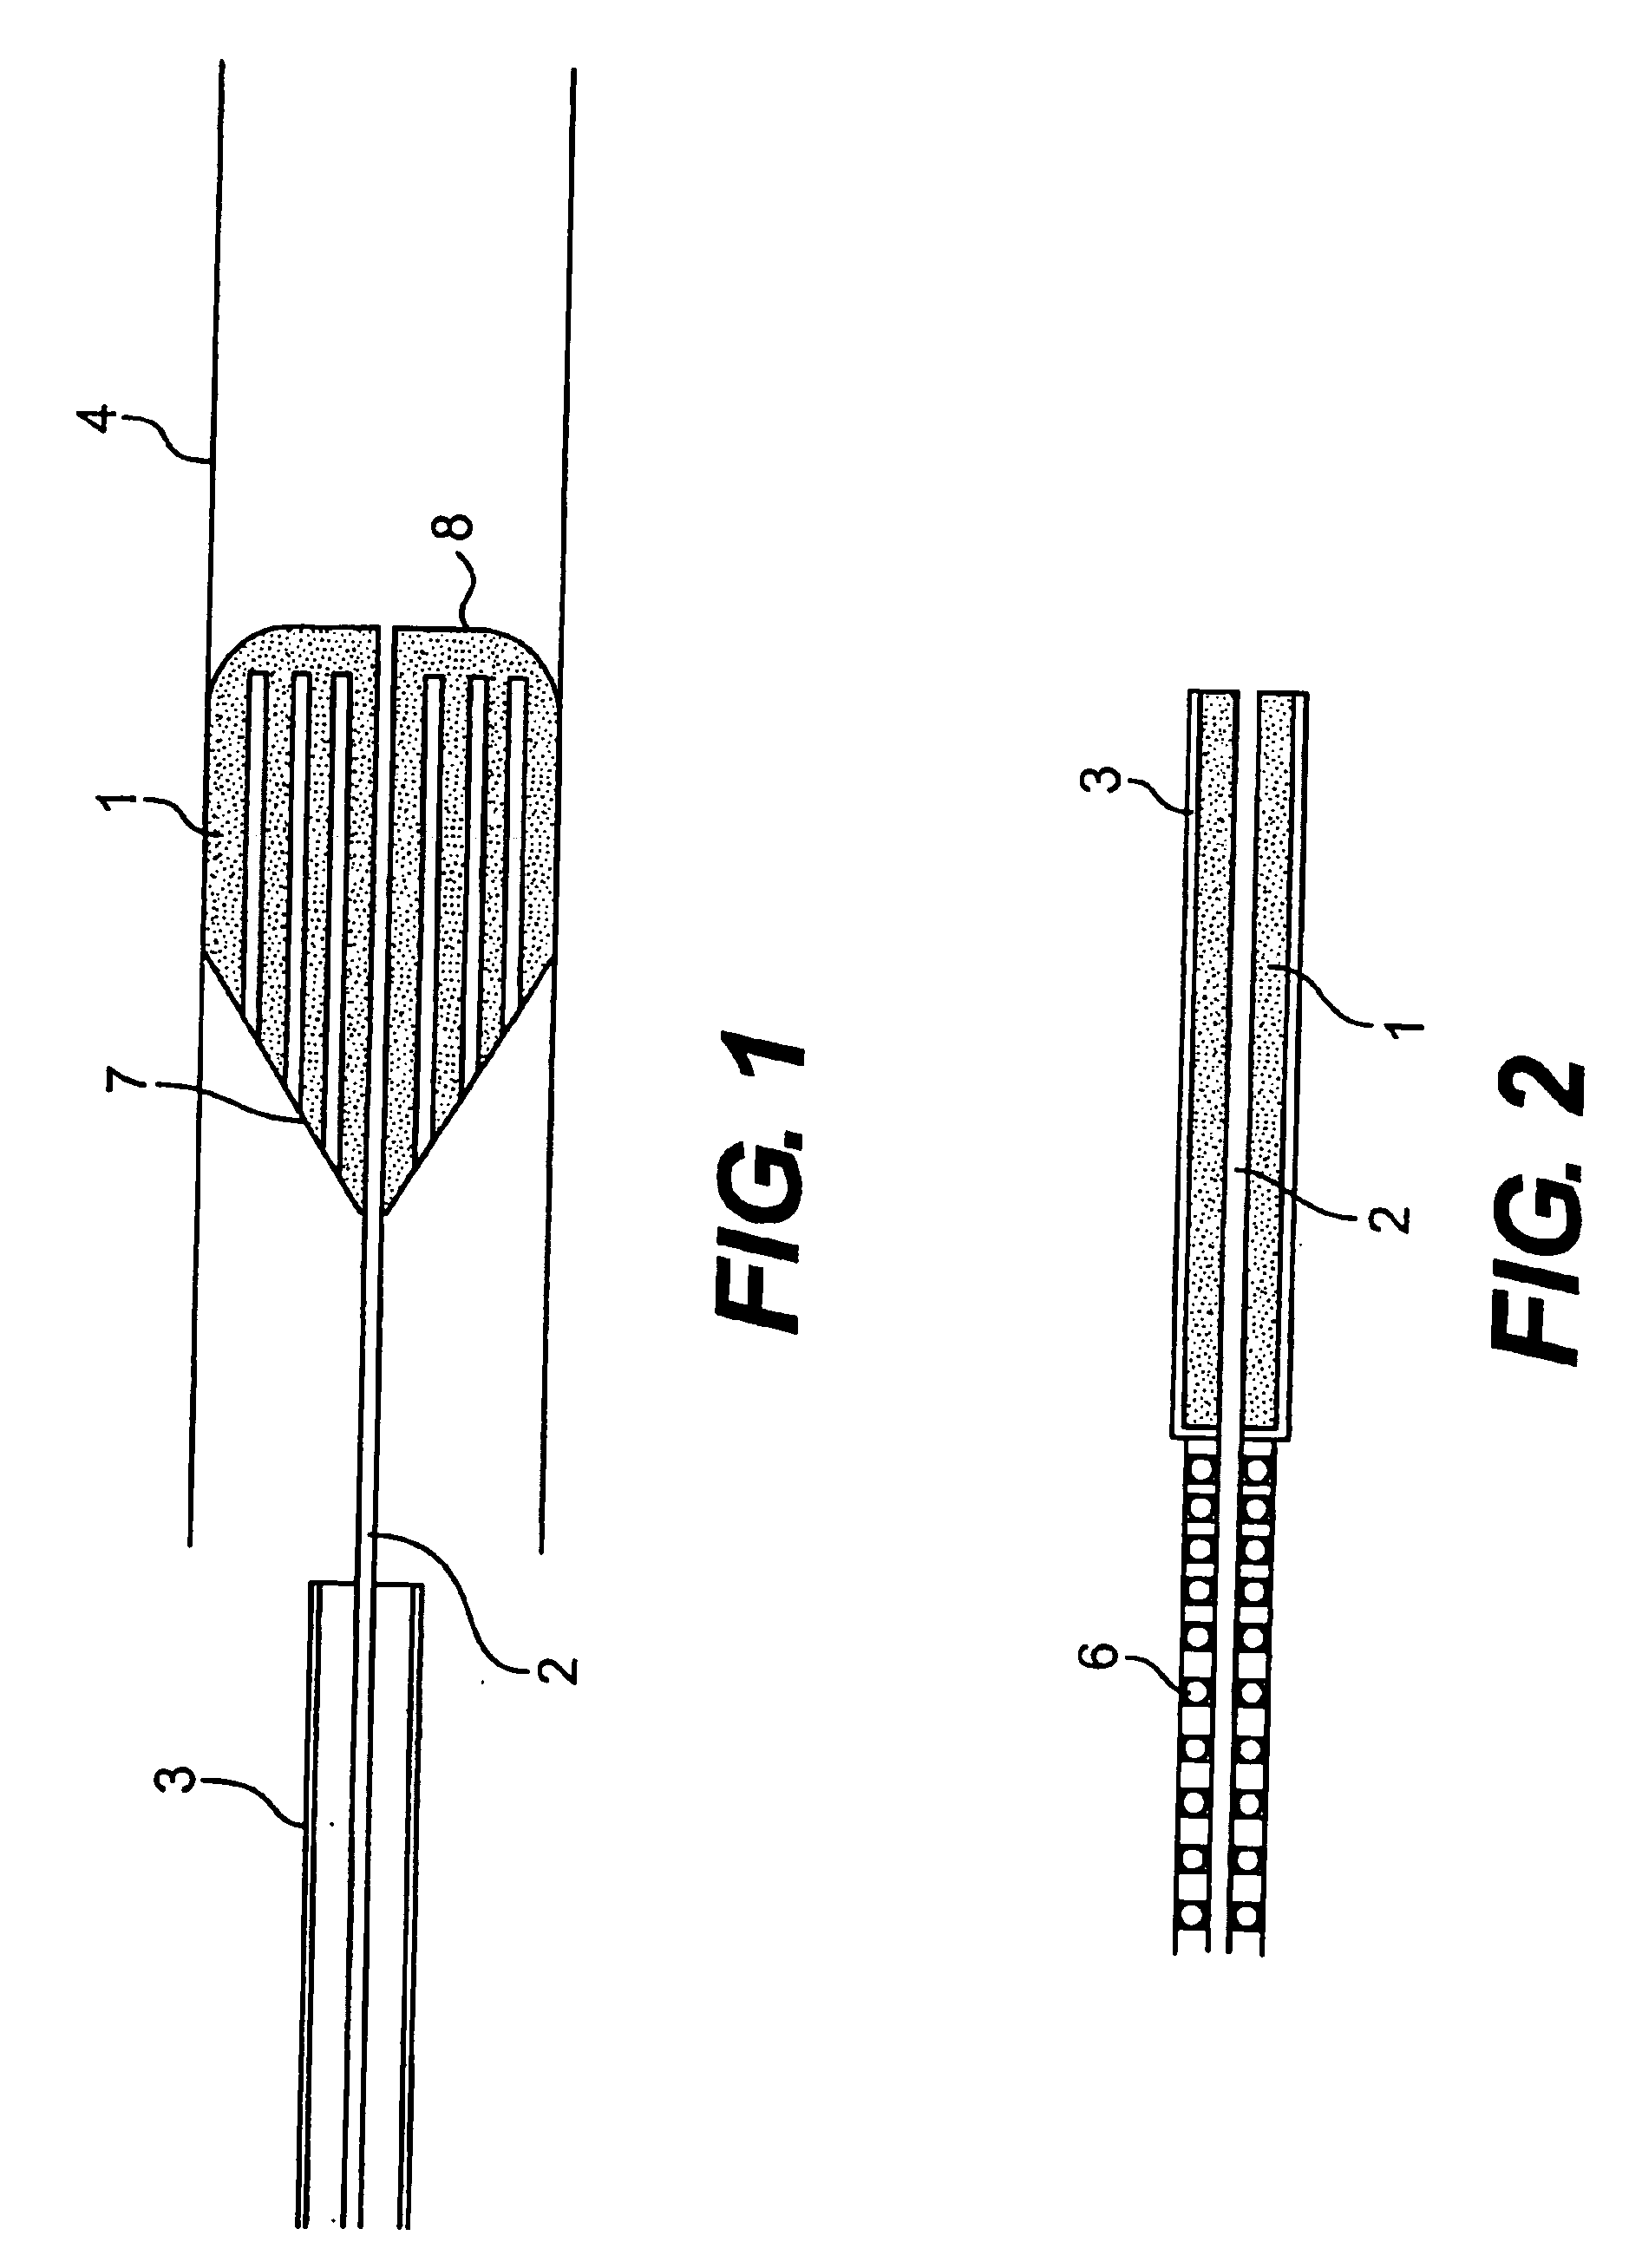 Embolic protection device